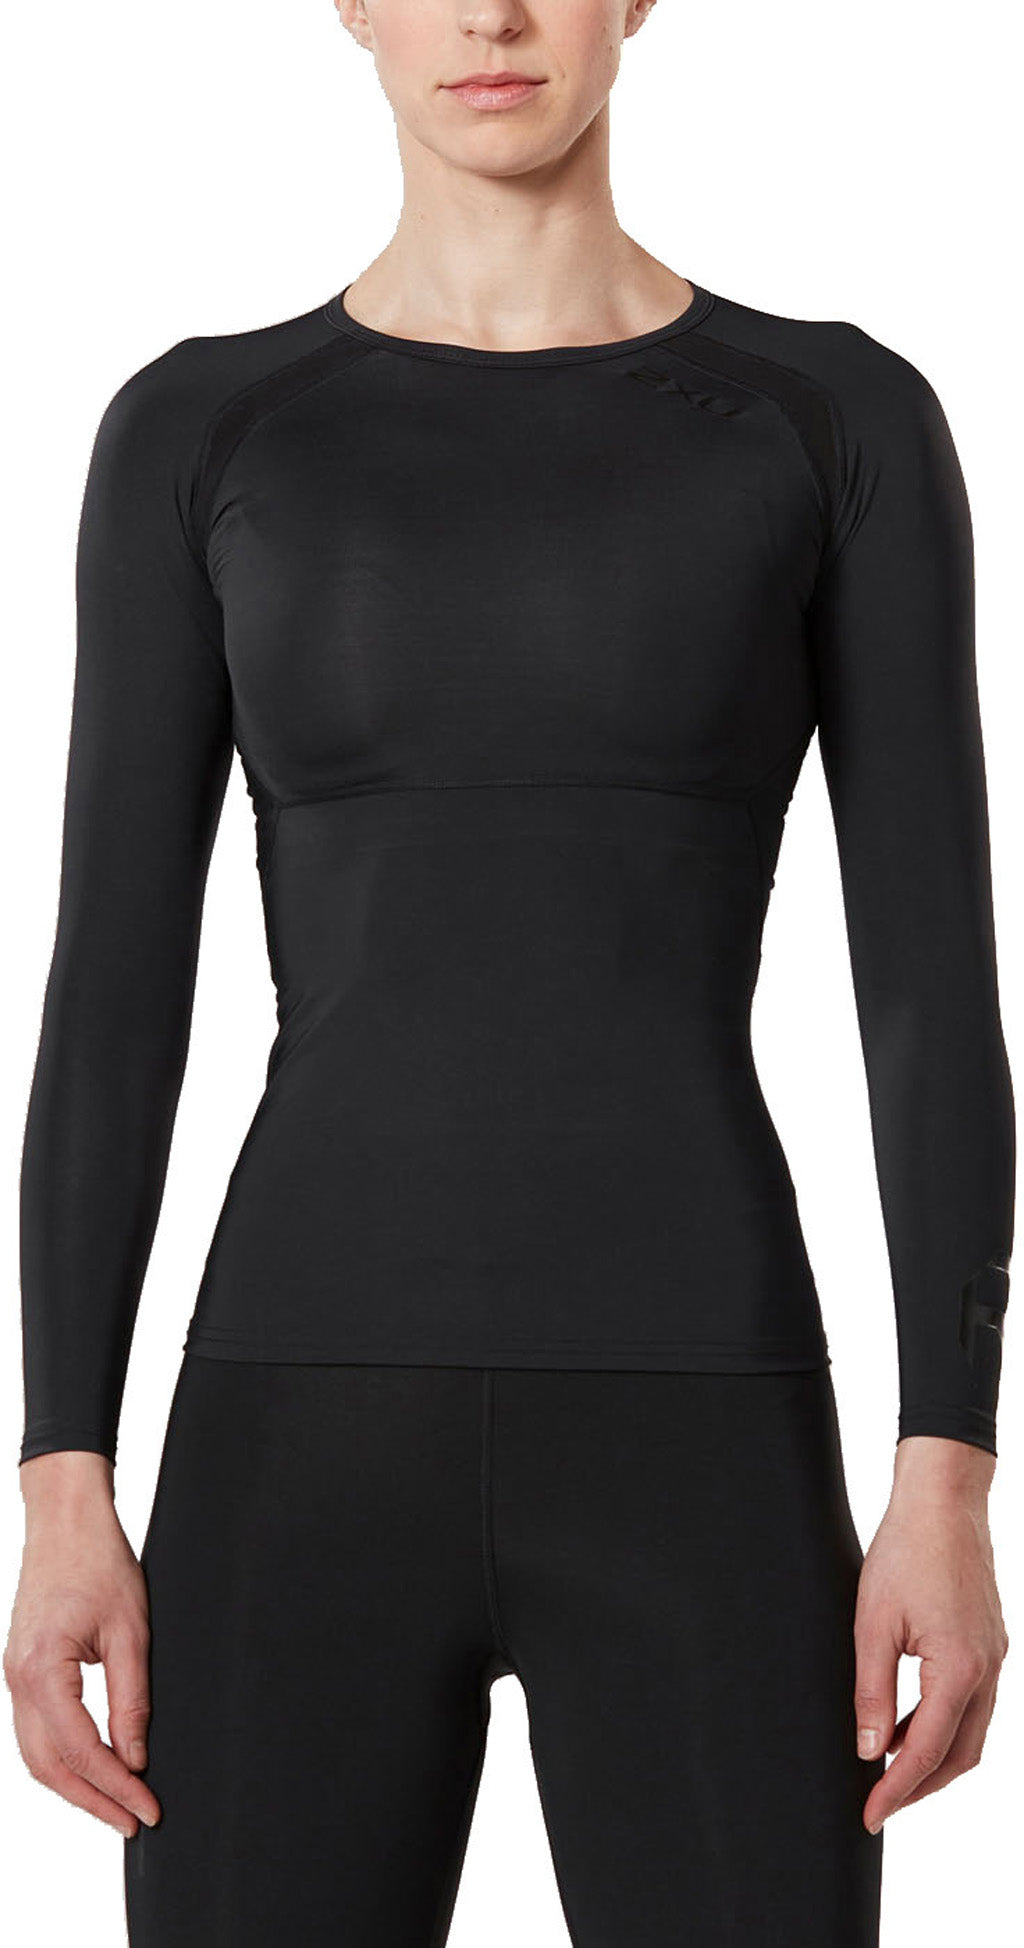 2XU Refresh Recovery Long Sleeve Compression Top - Women's | The Last Hunt